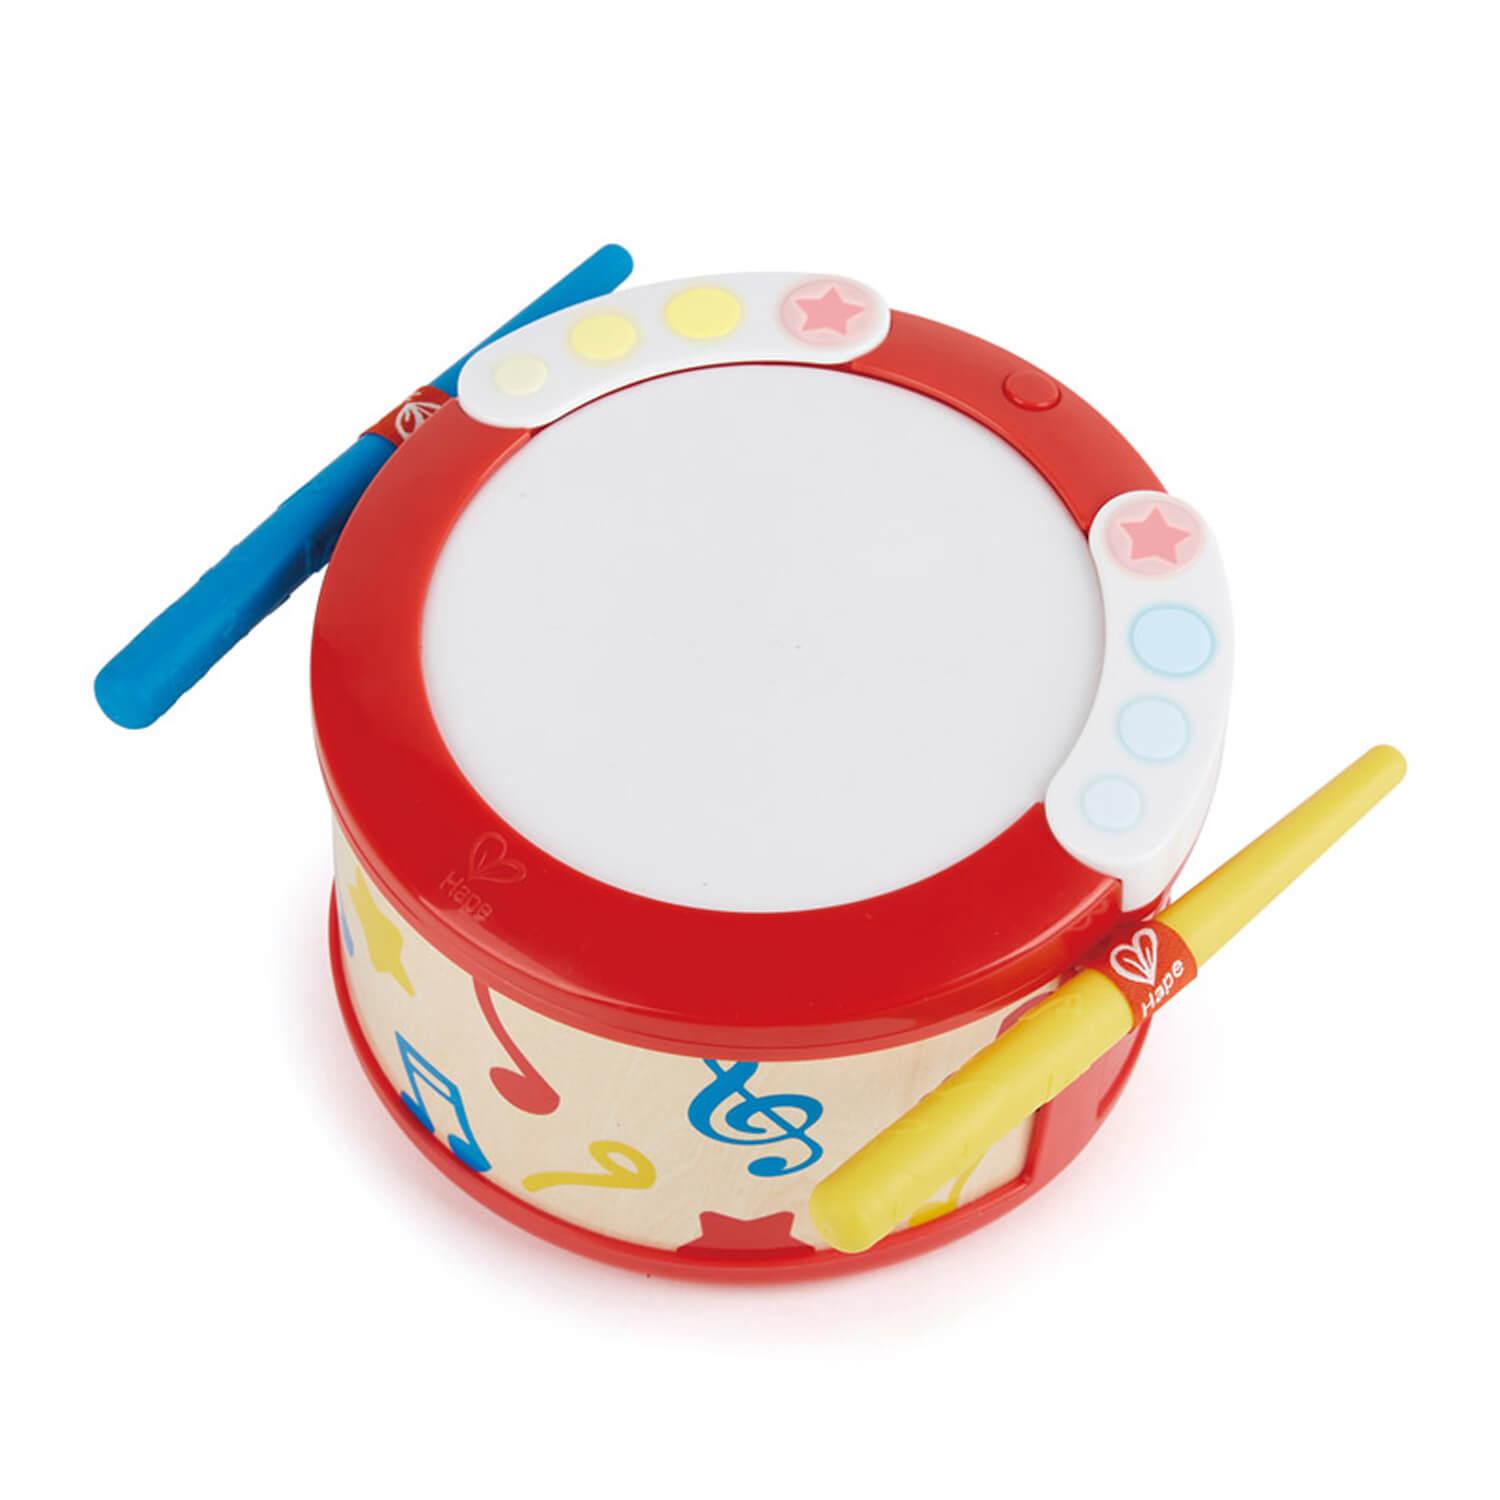 Tambourin enfant Animambo - Made in Bébé